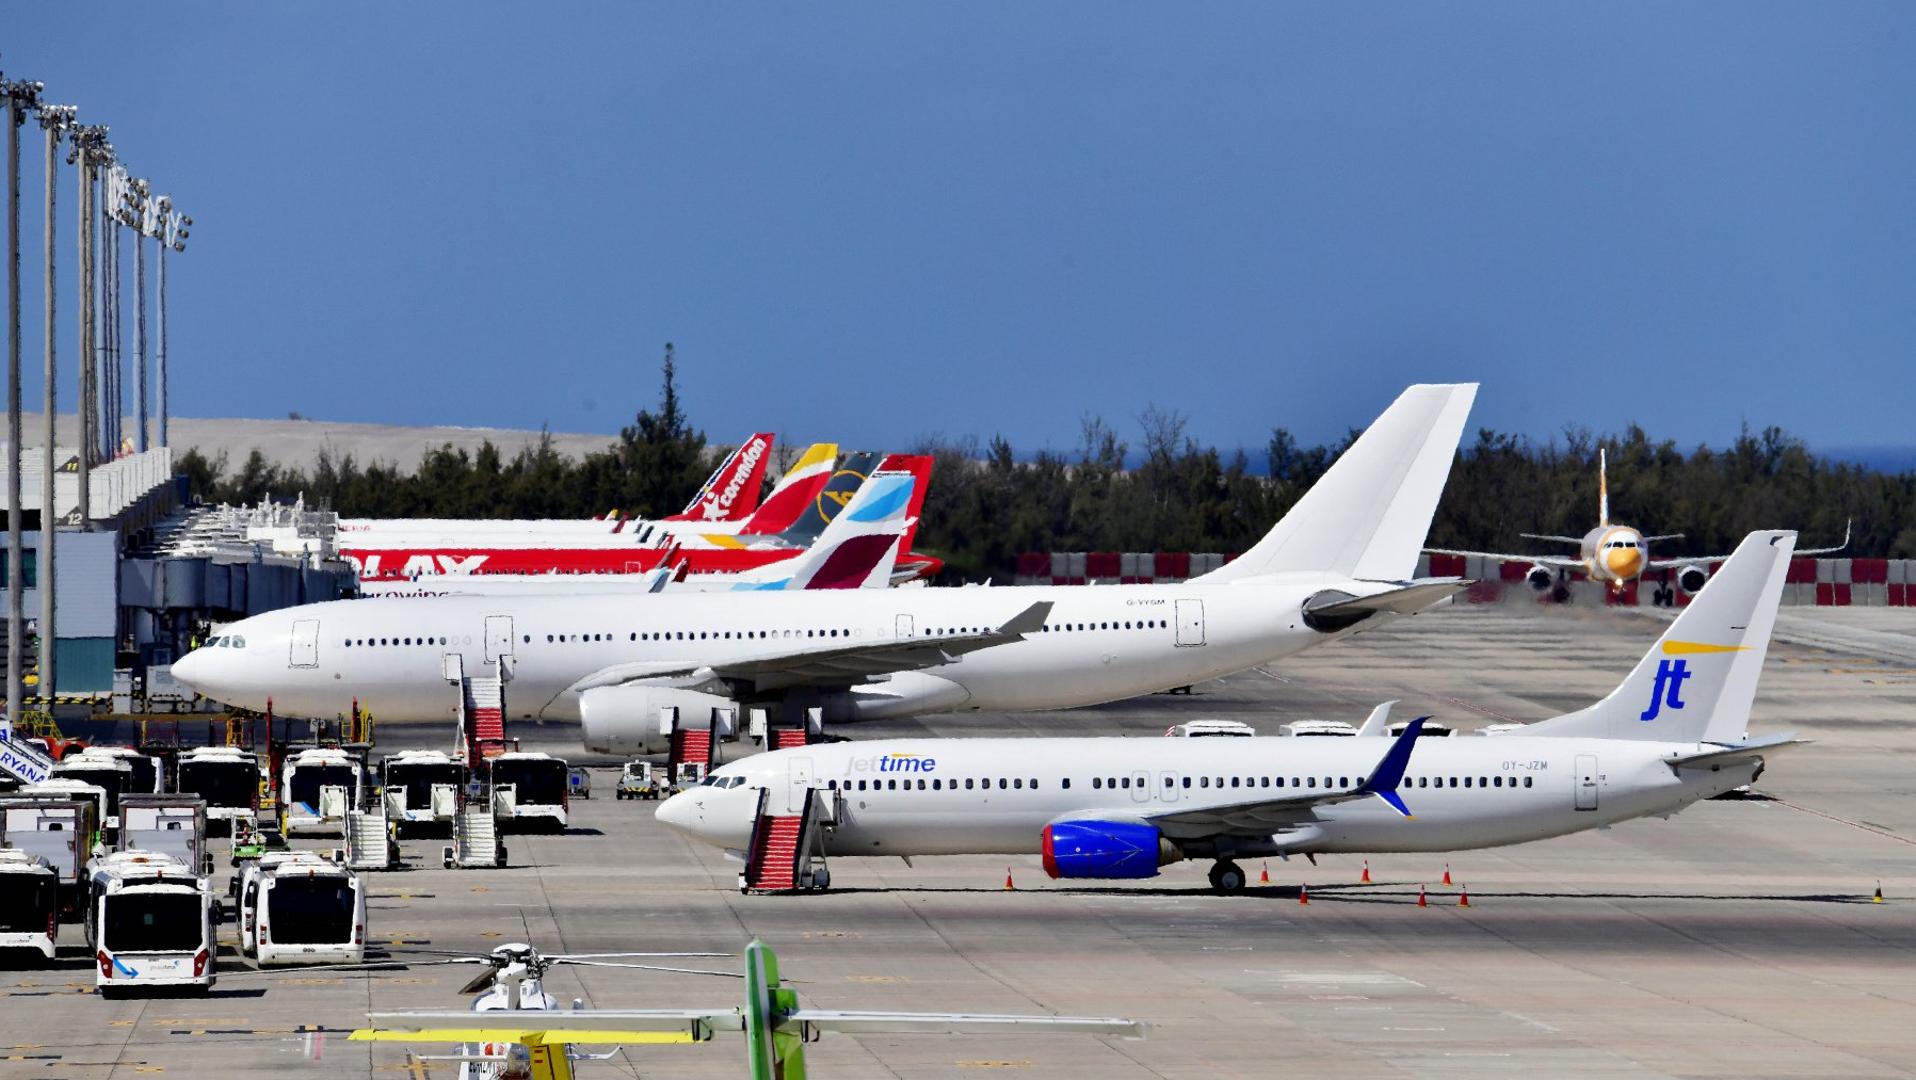 The Canary Islands register this year almost 1,000 more flights per month than in 2019